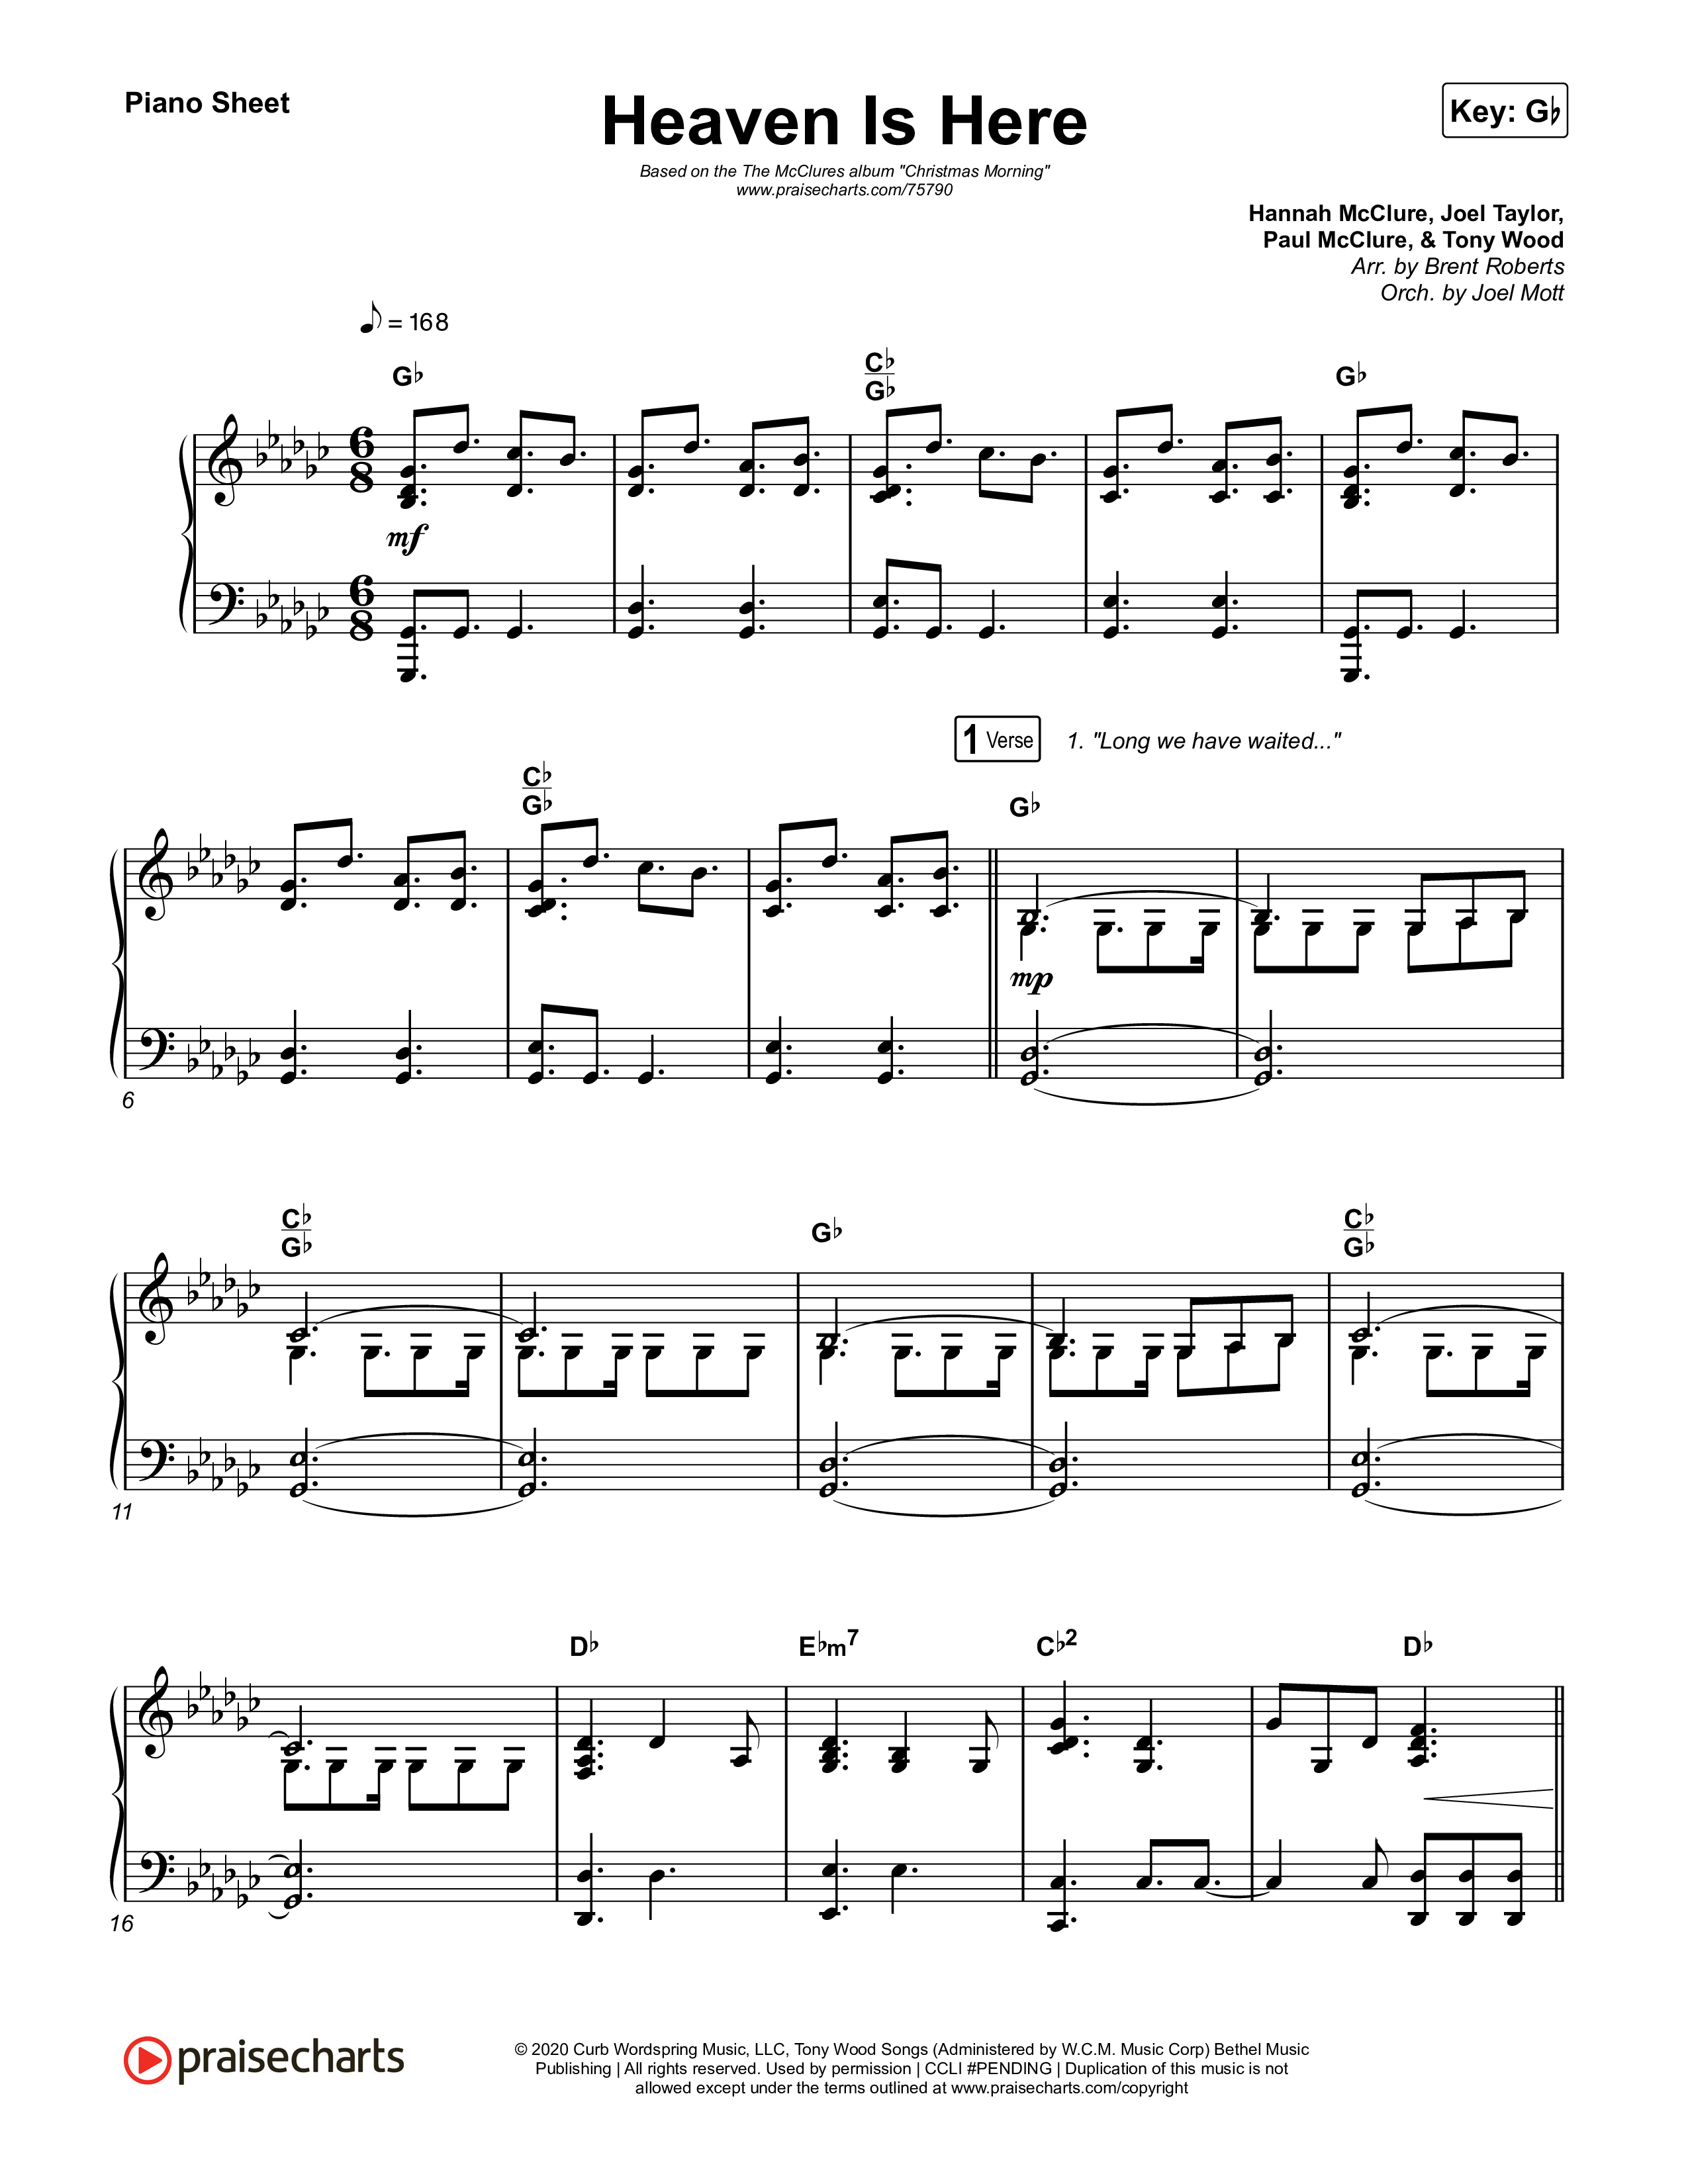 Heaven Is Here (Live) Piano Sheet (The McClures / Hannah McClure / Paul McClure)